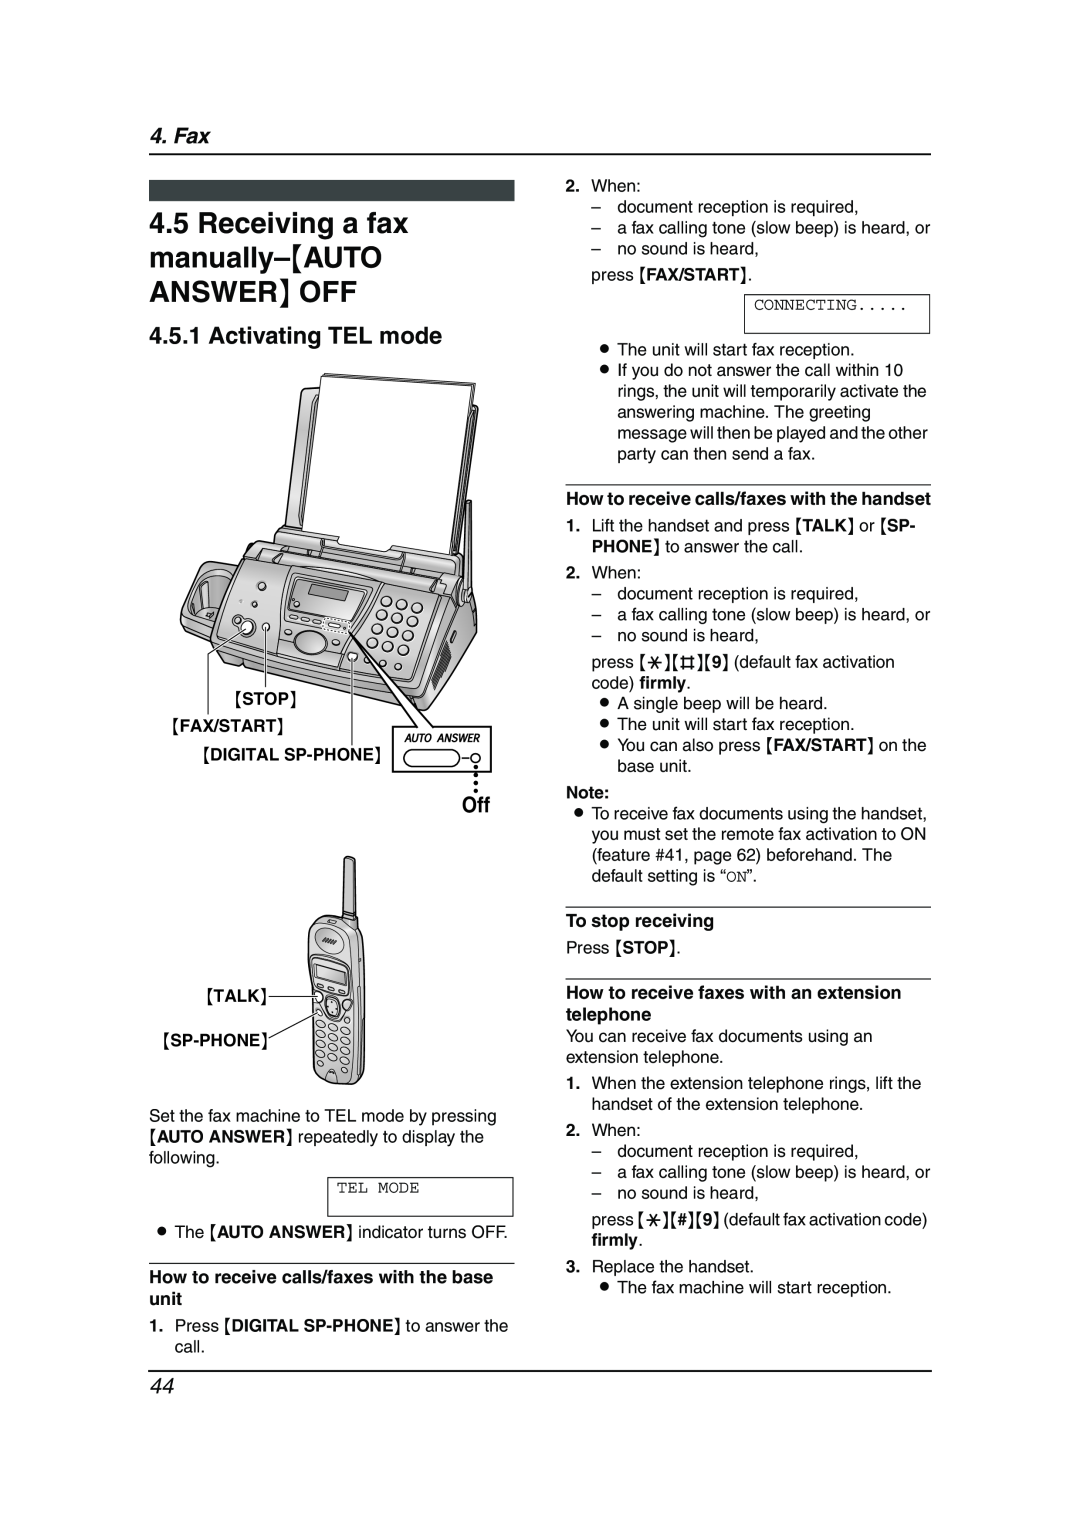 Panasonic KX-FPG376, KX-FPG377 Receiving a fax manually-AUTO ANSWER OFF, Activating TEL mode, Fax 